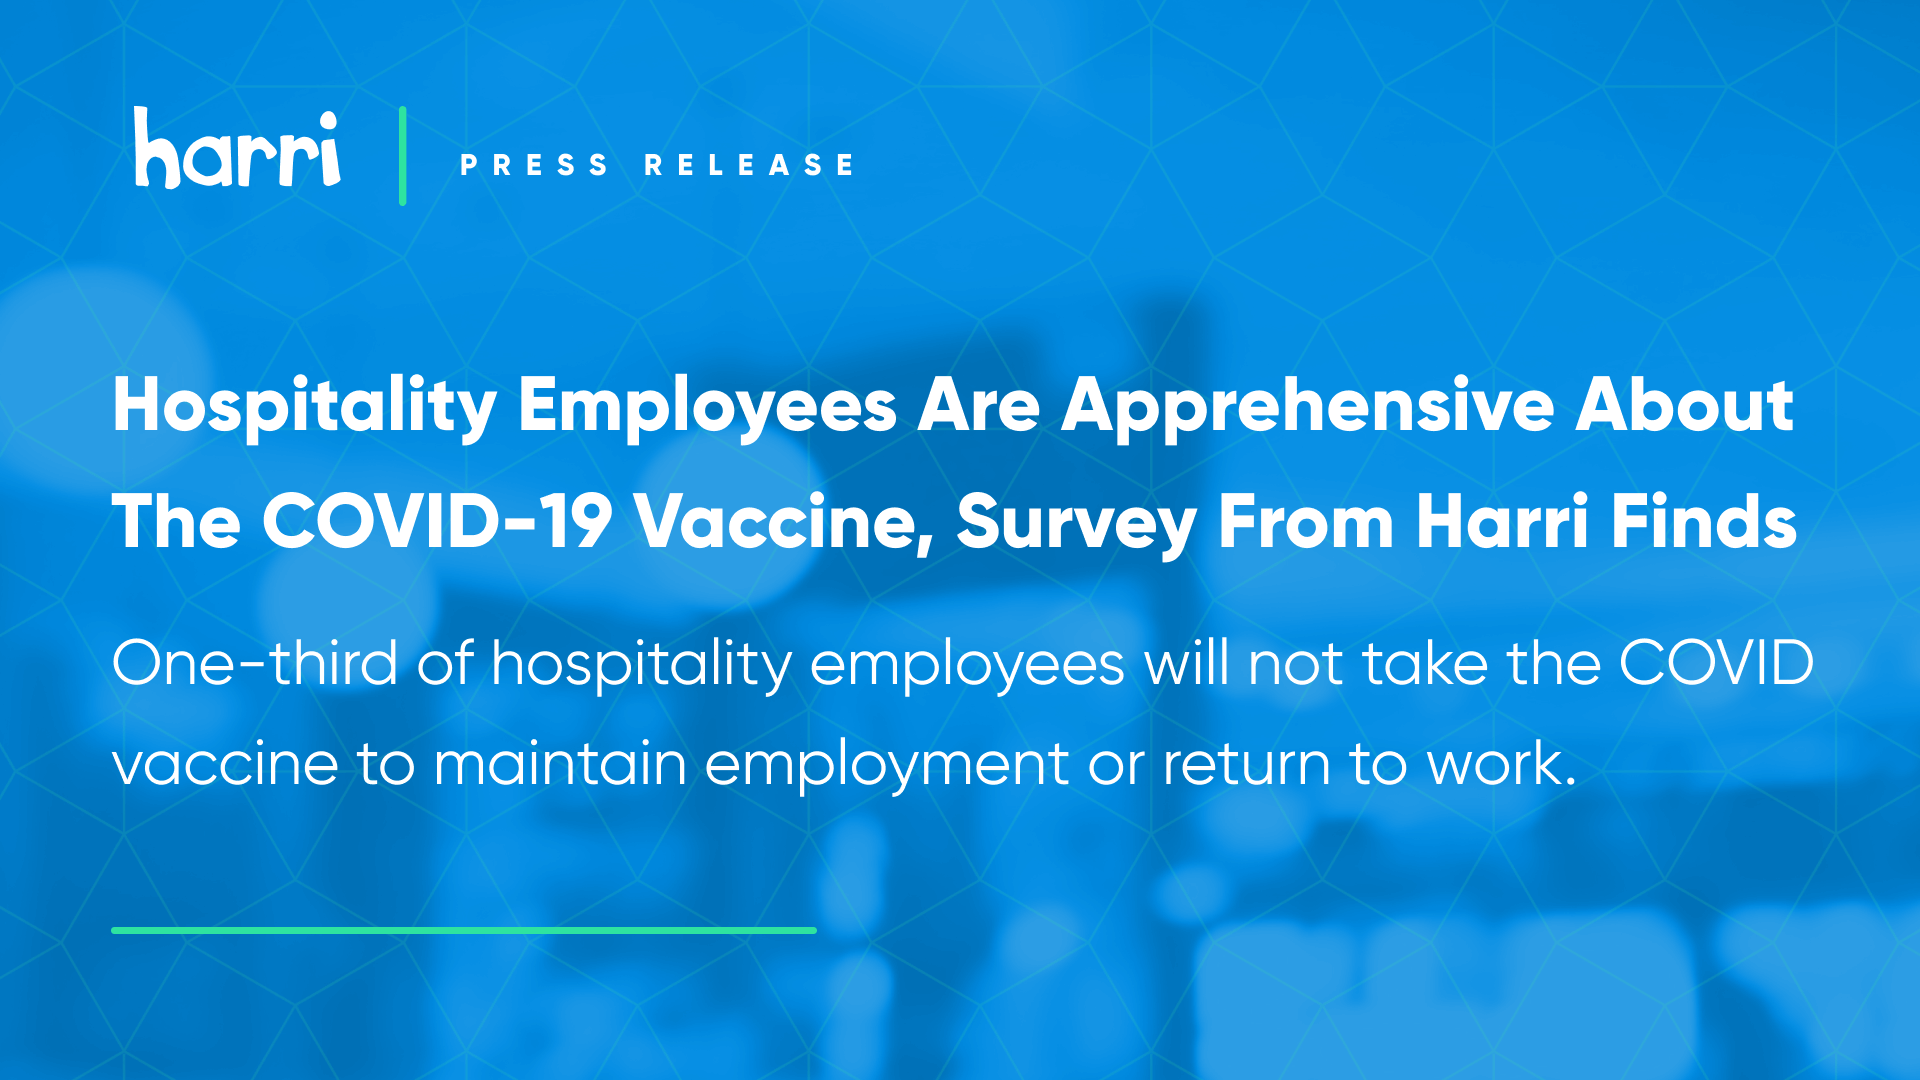 Harri, a leading HCM platform for service industries, reveals that one-third of hospitality employees will not take the COVID-19 vaccine to maintain employment or return to work.